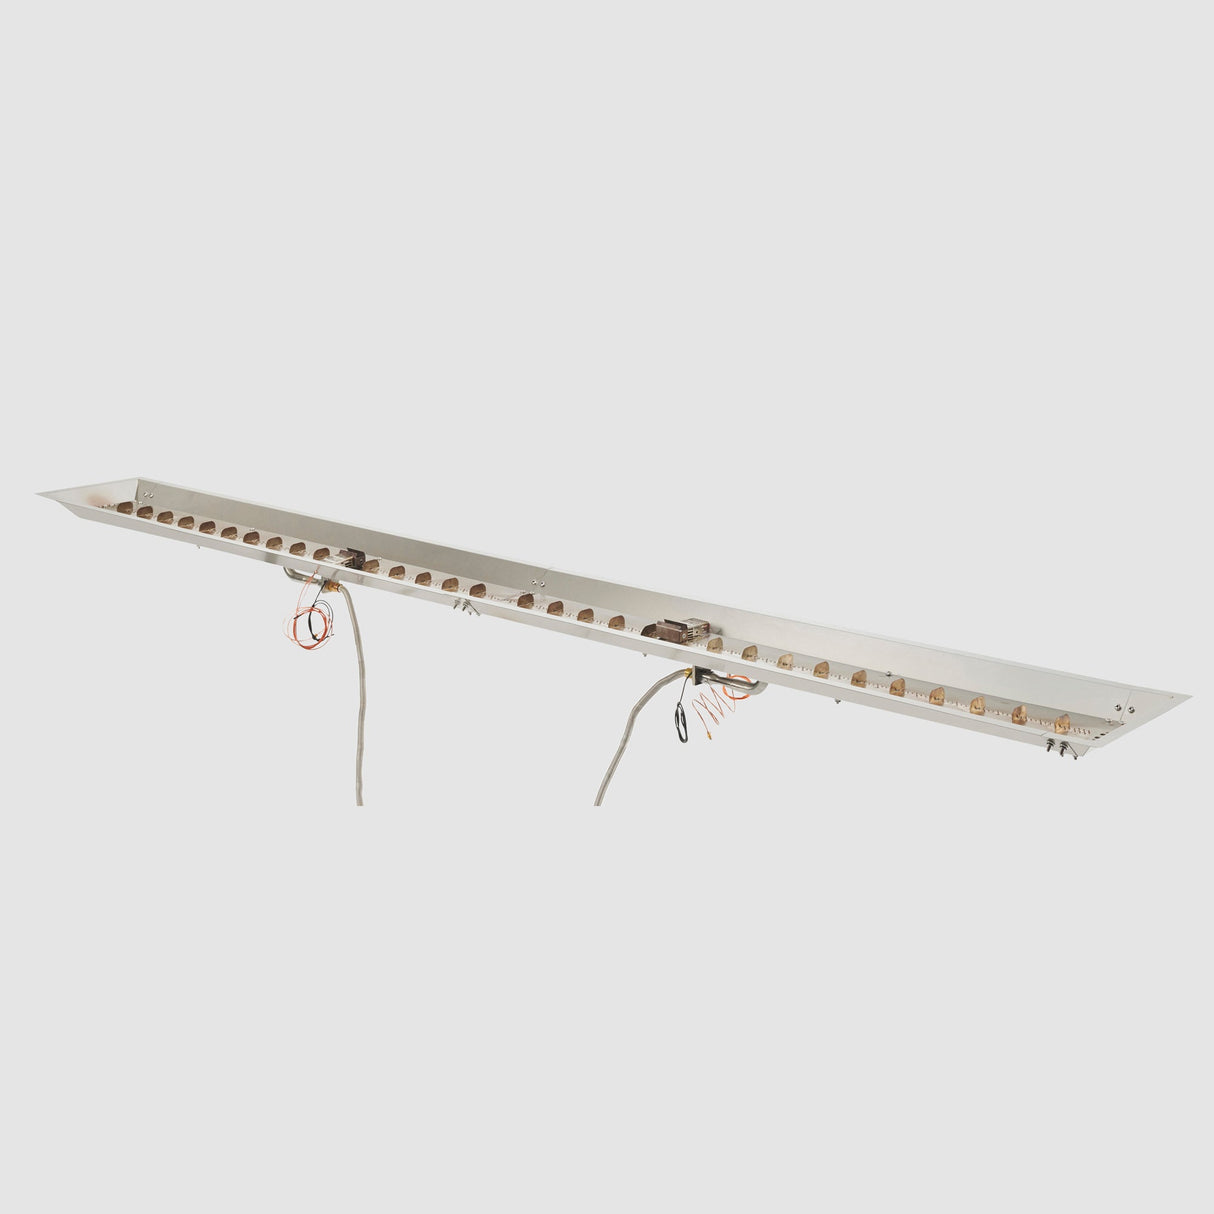 The 120" Crystal Fire Plus Linear Gas Burner on a grey background